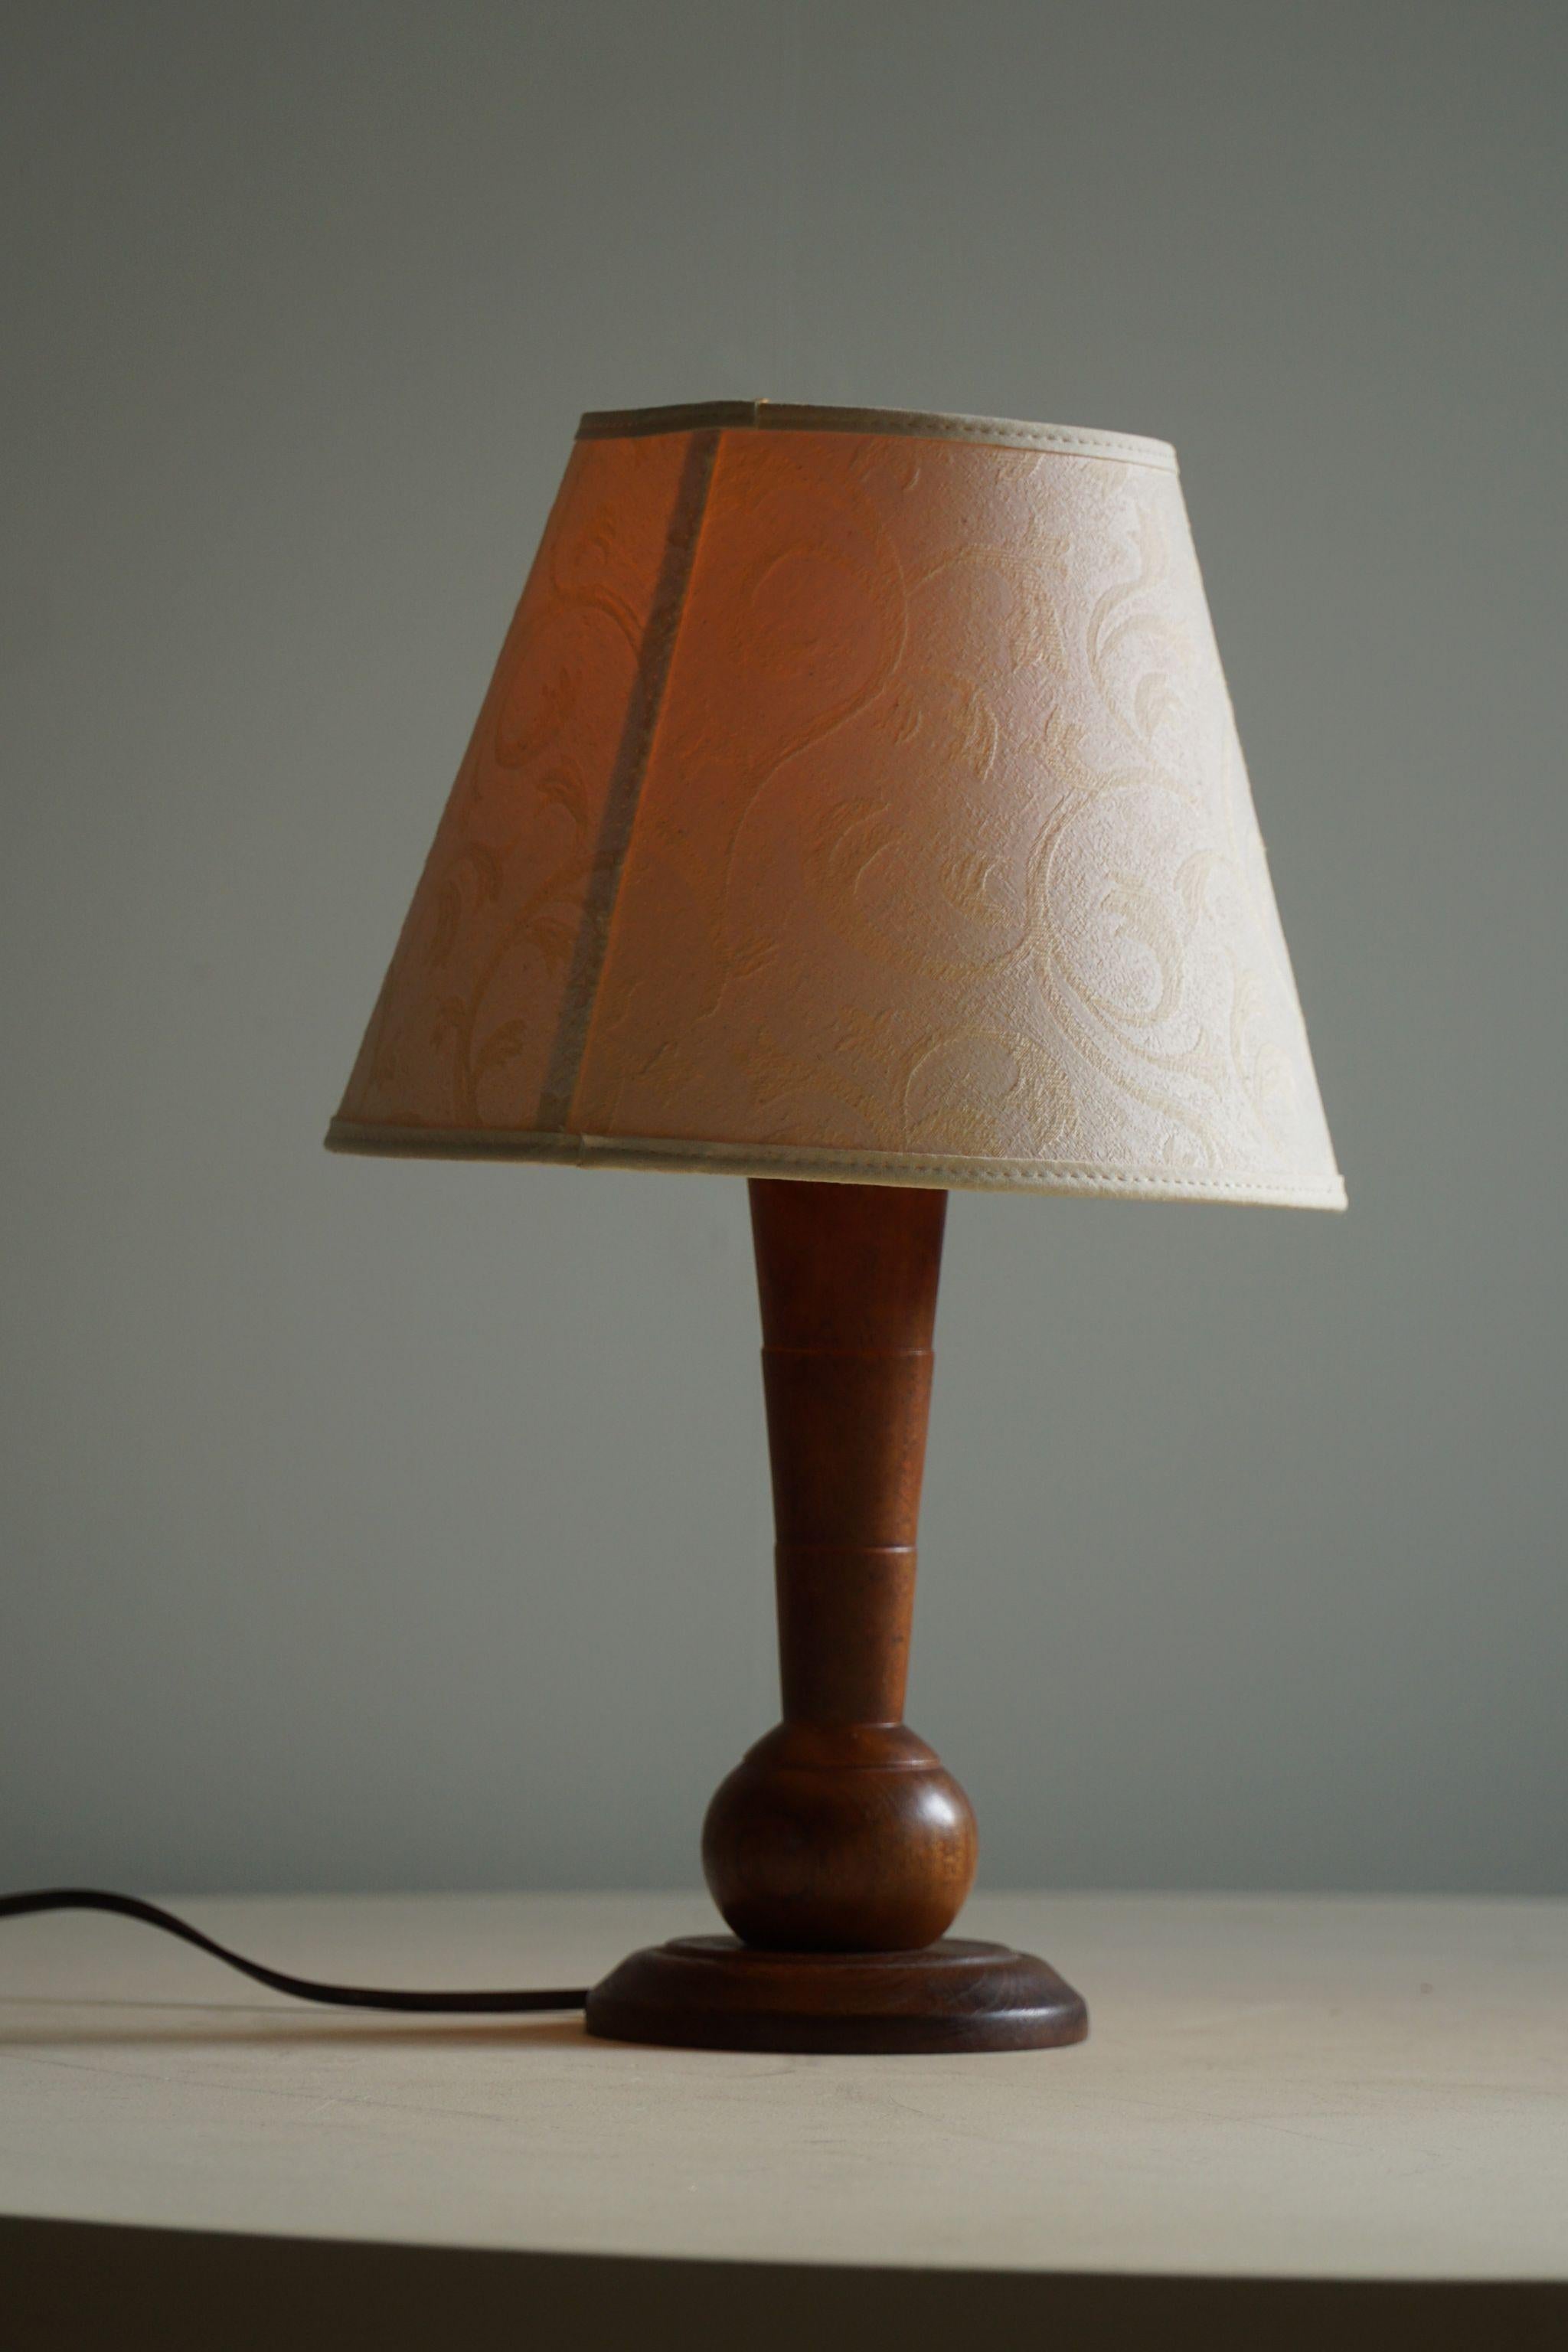 Sculptural Wooden Teak Art Deco Table Lamp, Danish Modern, 1940s In Good Condition For Sale In Odense, DK